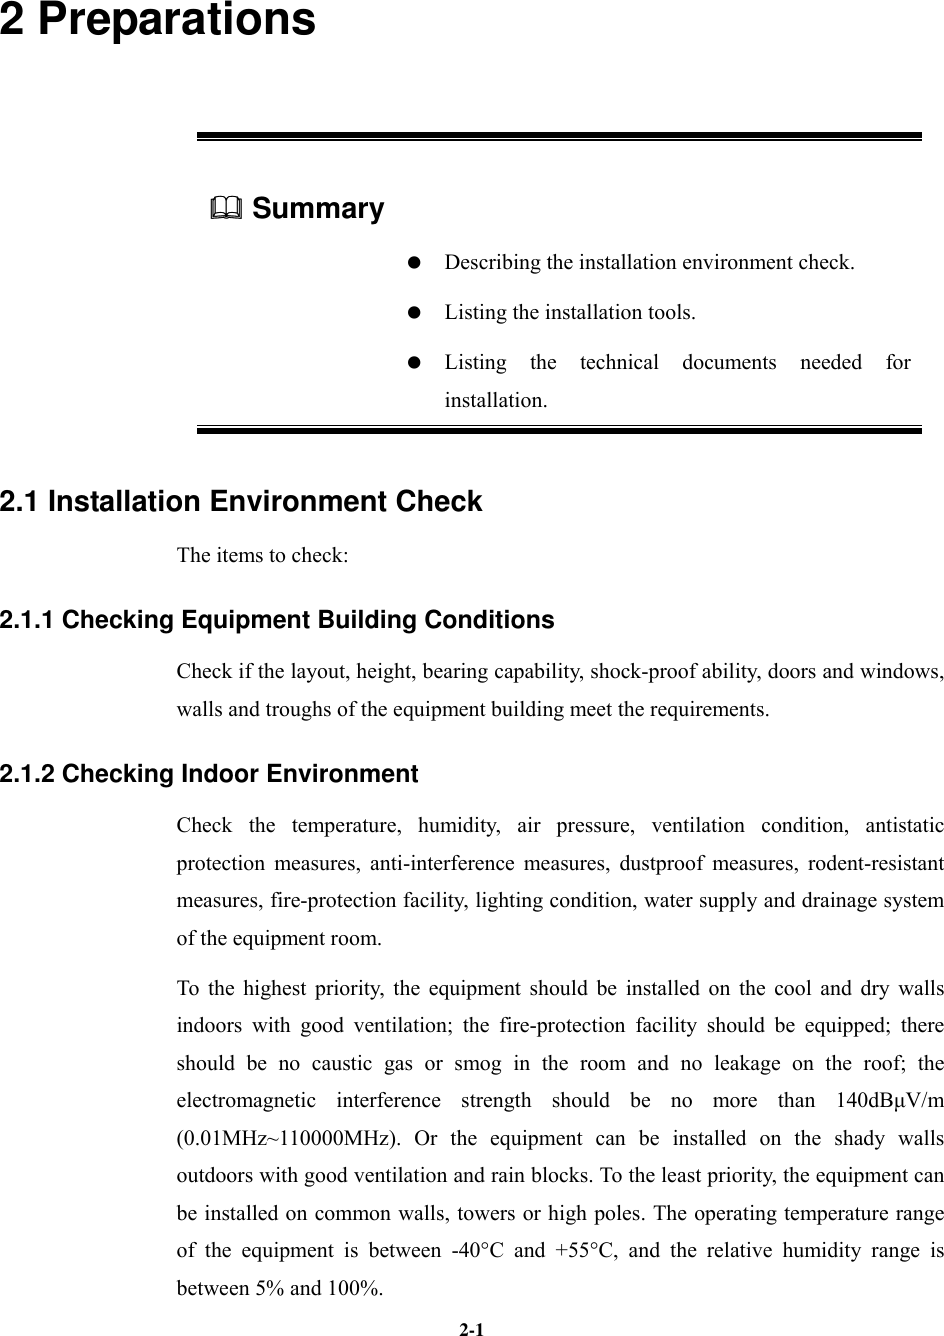   2-12 Preparations  Summary      Describing the installation environment check.    Listing the installation tools.   Listing the technical documents needed for installation. 2.1 Installation Environment Check The items to check: 2.1.1 Checking Equipment Building Conditions Check if the layout, height, bearing capability, shock-proof ability, doors and windows, walls and troughs of the equipment building meet the requirements. 2.1.2 Checking Indoor Environment Check the temperature, humidity, air pressure, ventilation condition, antistatic protection measures, anti-interference measures, dustproof measures, rodent-resistant measures, fire-protection facility, lighting condition, water supply and drainage system of the equipment room. To the highest priority, the equipment should be installed on the cool and dry walls indoors with good ventilation; the fire-protection facility should be equipped; there should be no caustic gas or smog in the room and no leakage on the roof; the electromagnetic interference strength should be no more than 140dBµV/m (0.01MHz~110000MHz). Or the equipment can be installed on the shady walls outdoors with good ventilation and rain blocks. To the least priority, the equipment can be installed on common walls, towers or high poles. The operating temperature range of the equipment is between -40°C and +55°C, and the relative humidity range is between 5% and 100%. 